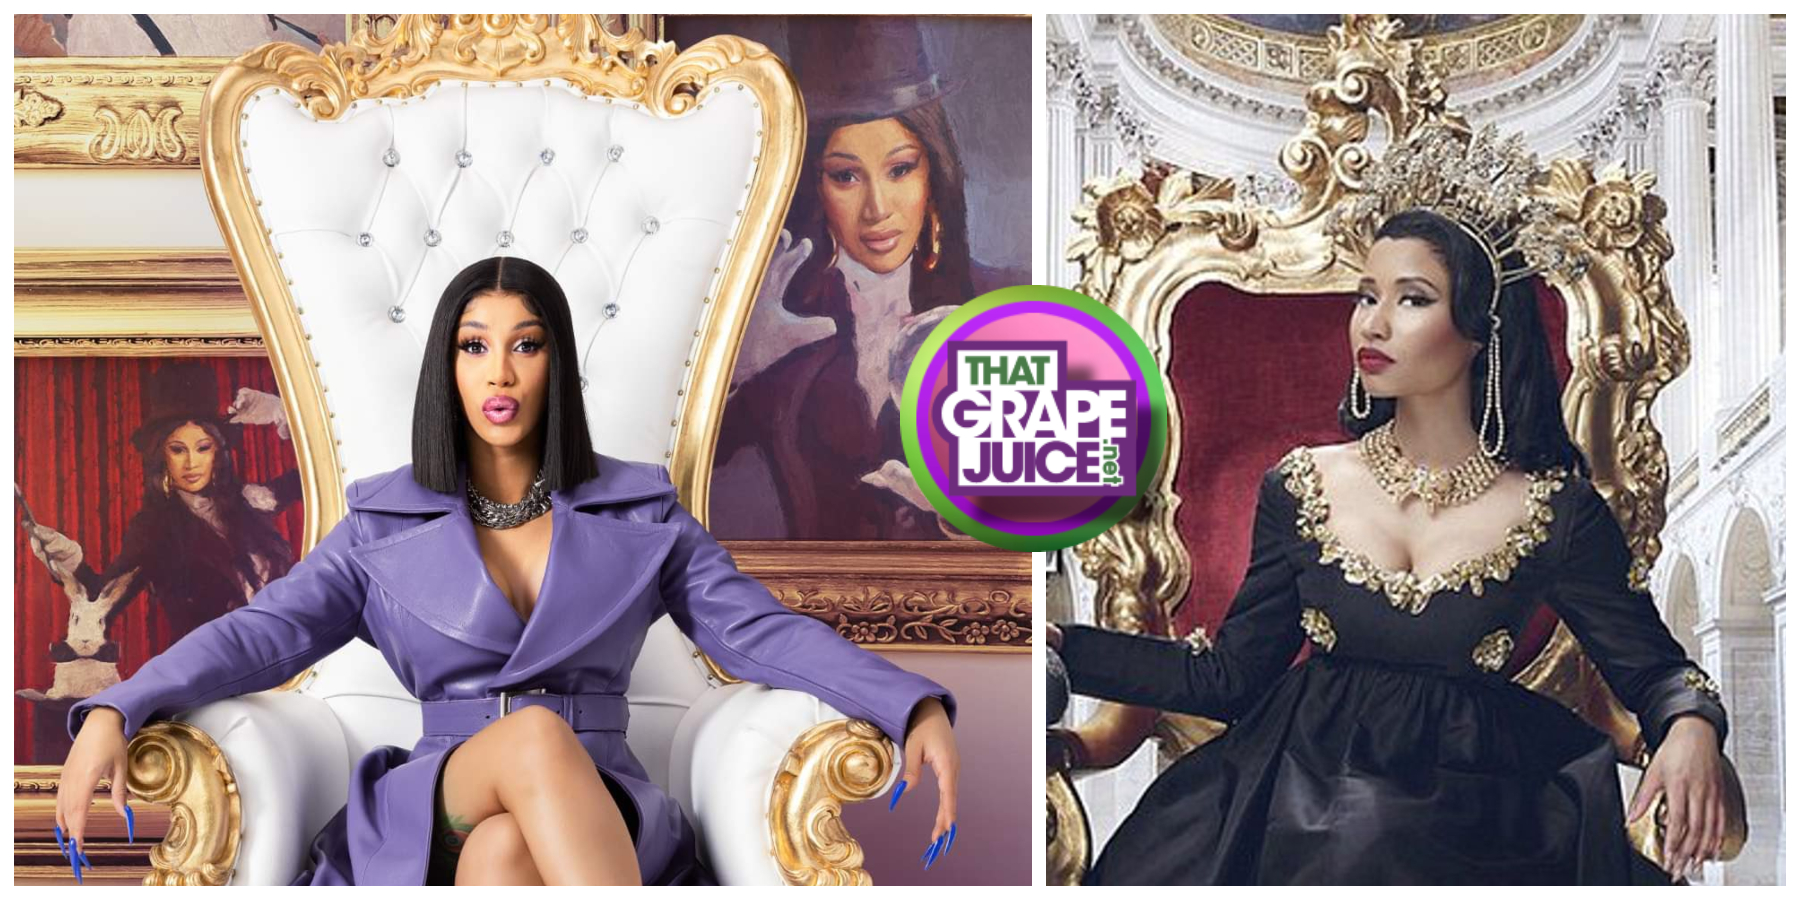 RIAA: Cardi B’s ‘Invasion of Privacy’ Breaks Tie with Nicki Minaj’s ‘Pink Friday’ For Highest-Certified Female Rap Album of the Century